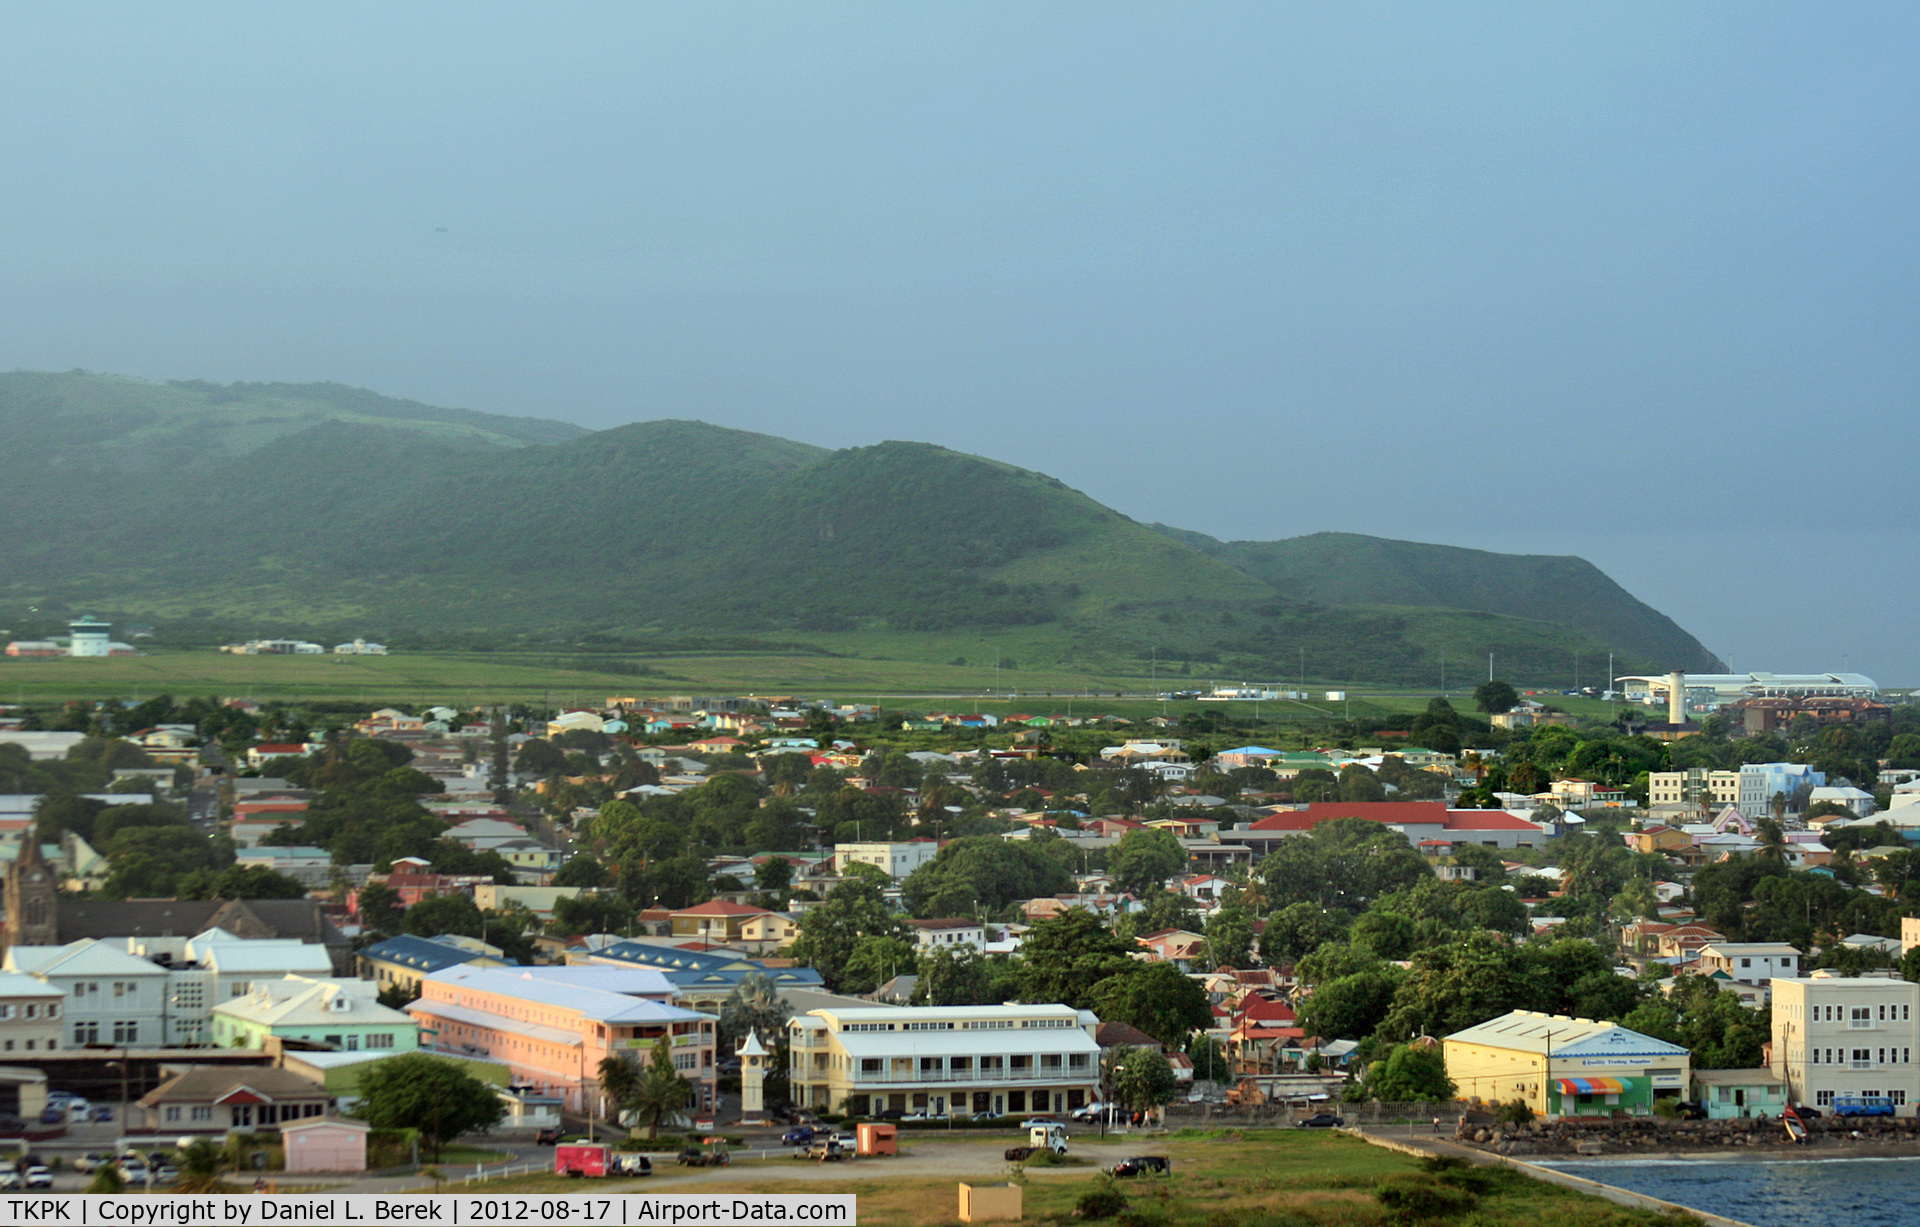 Robert L. Bradshaw International Airport, Basseterre, Saint Kitts Saint Kitts and Nevis (TKPK) - The new terminal is located at the end of the main runway.